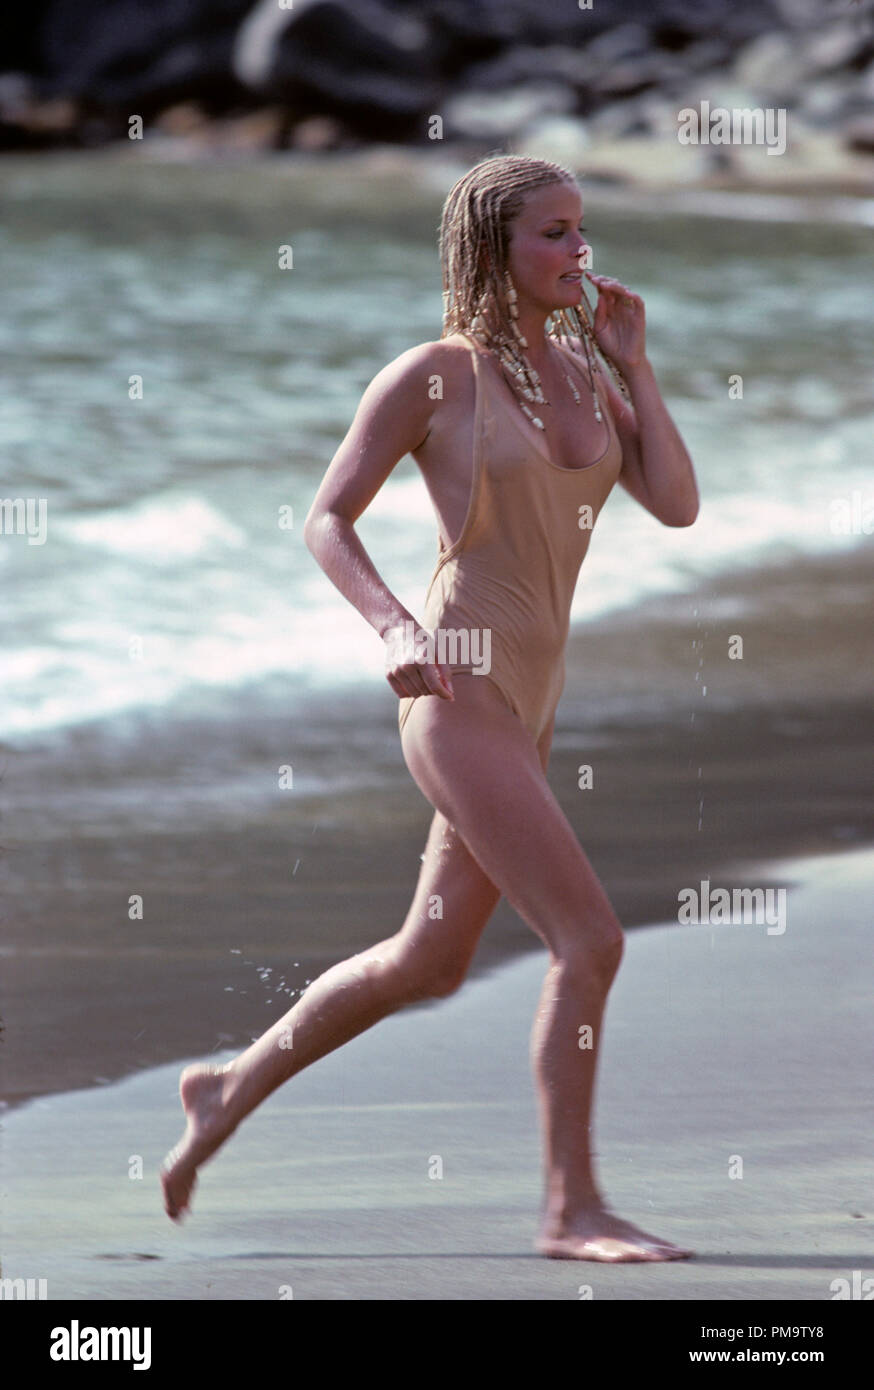 Studio Publicity Still from '10'  Bo Derek © 1979 Orion Pictures  All Rights Reserved   File Reference # 31718186THA  For Editorial Use Only Stock Photo